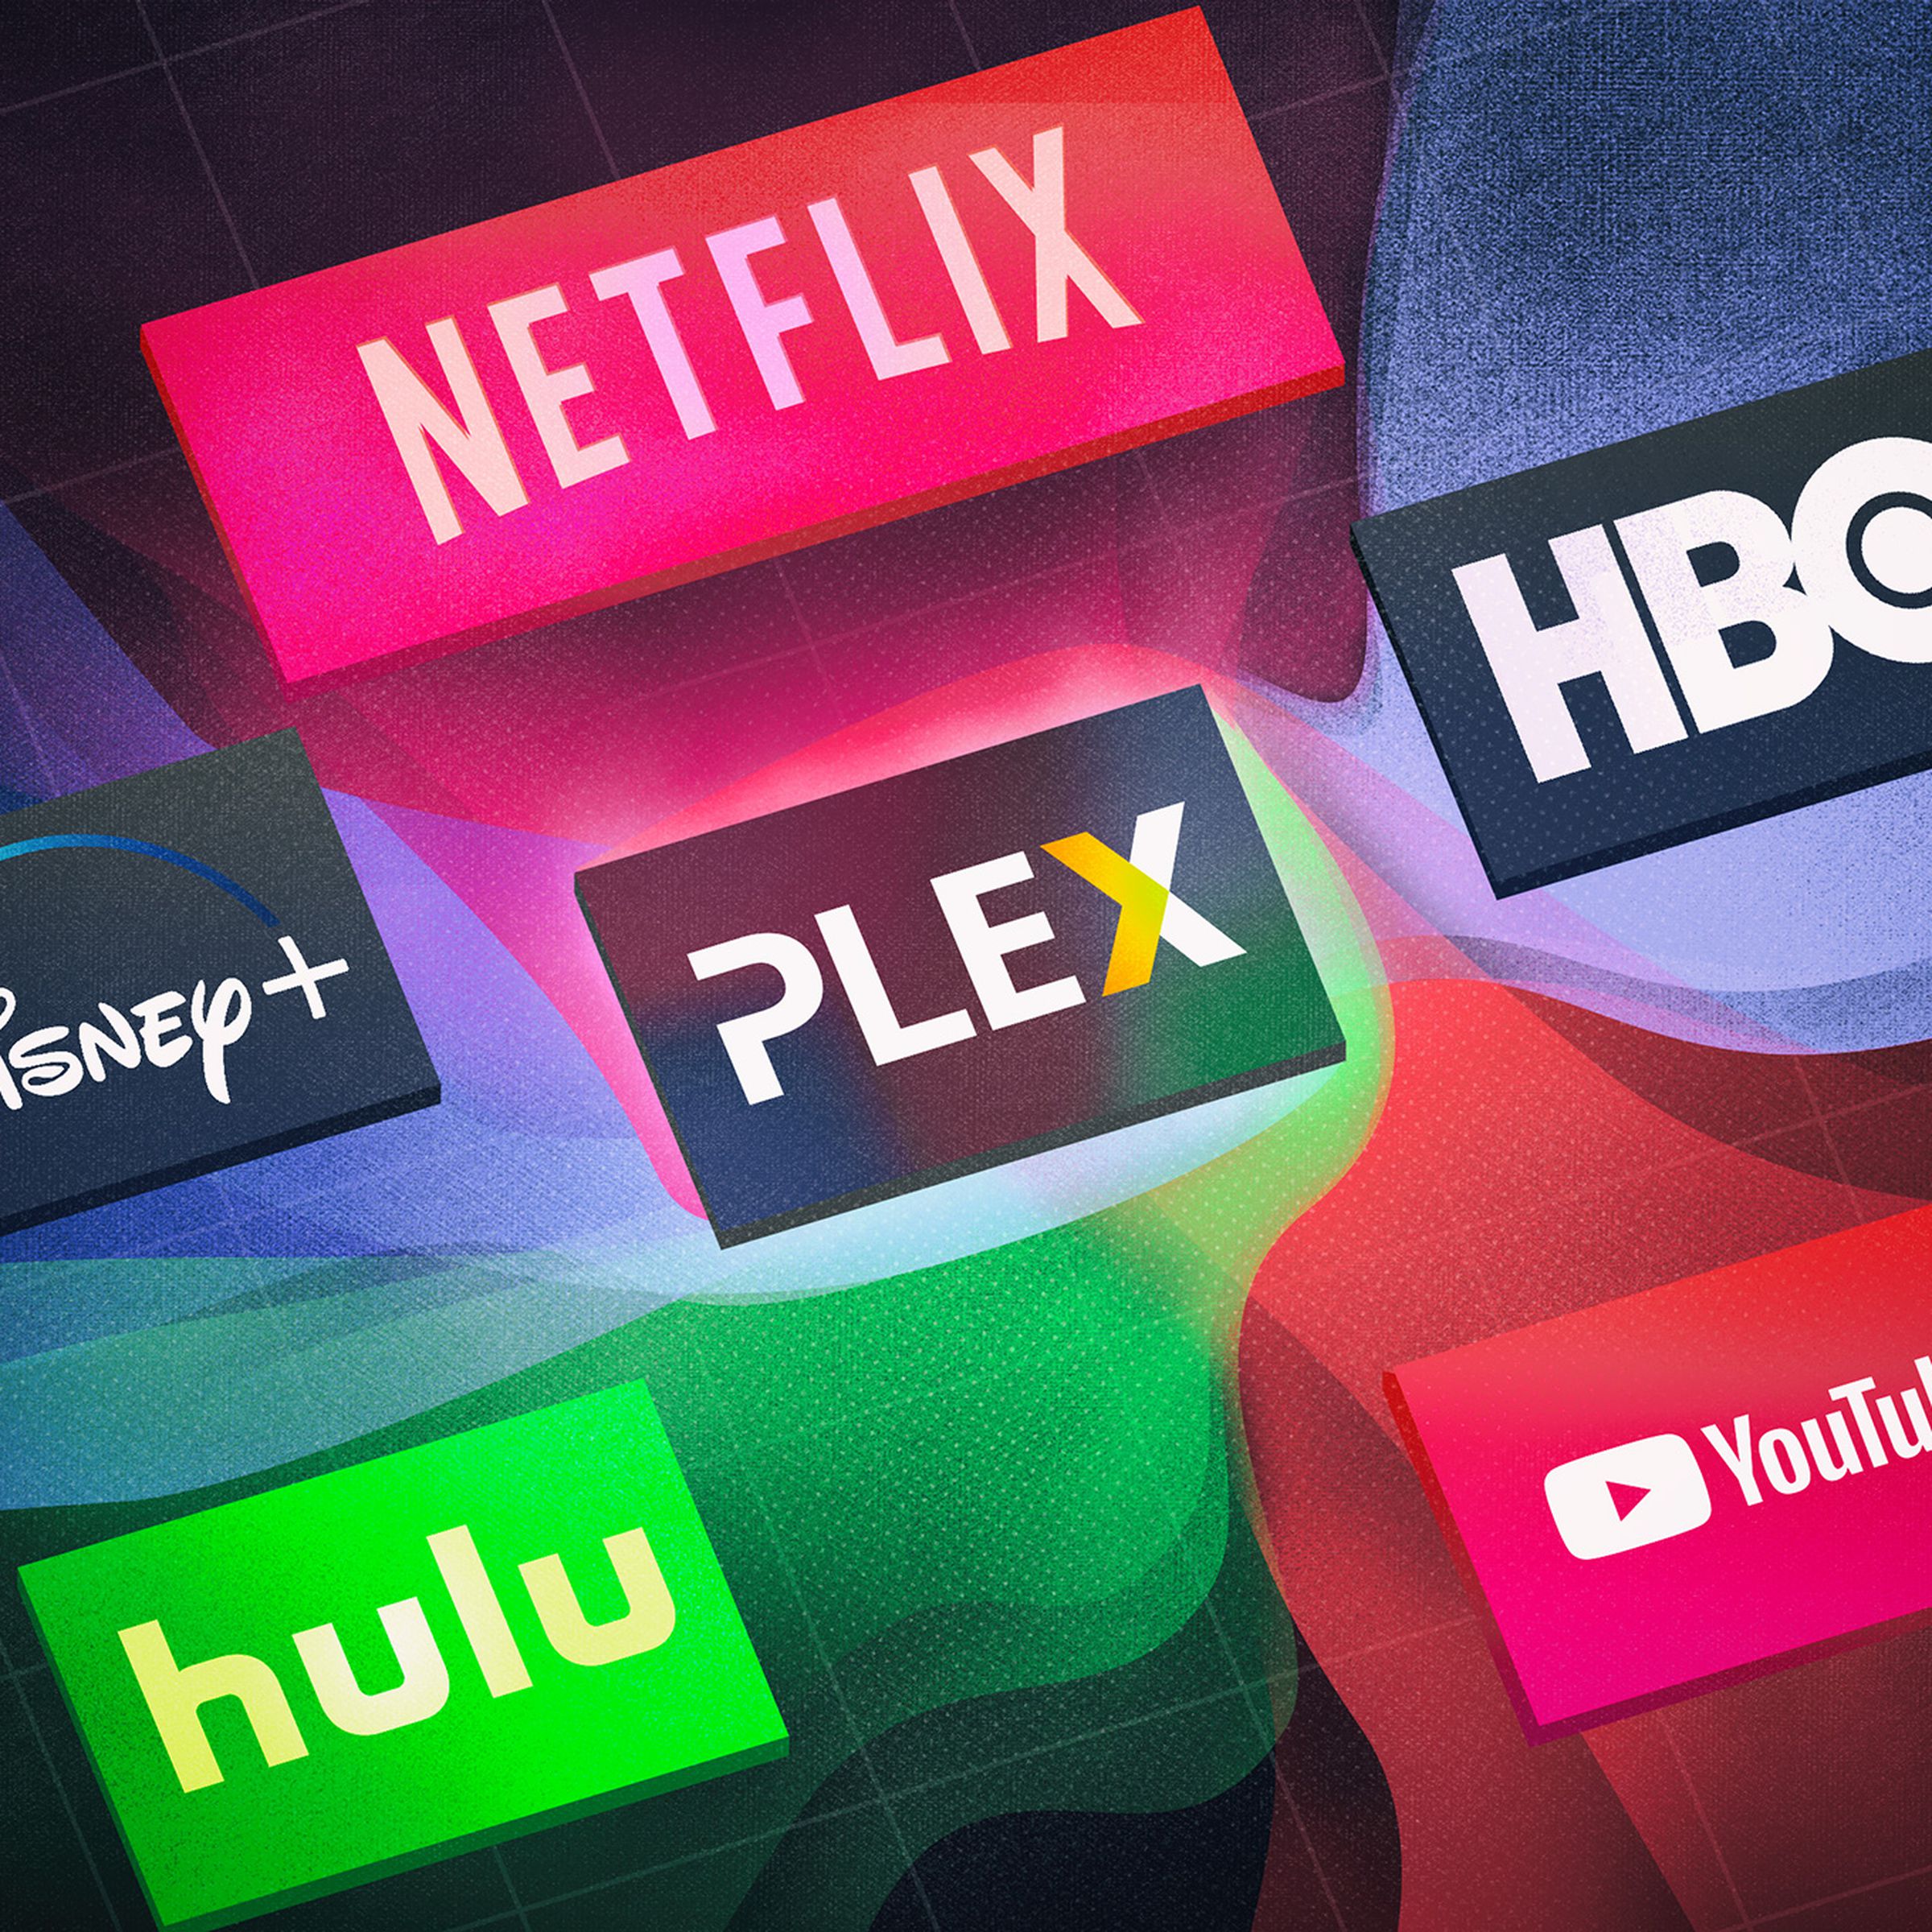 An illustration with logos of Netflix, Disney Plus, Hulu, YouTube, Plex, and HBO. The logo colors bleed into the dark background for a more colorful effect.